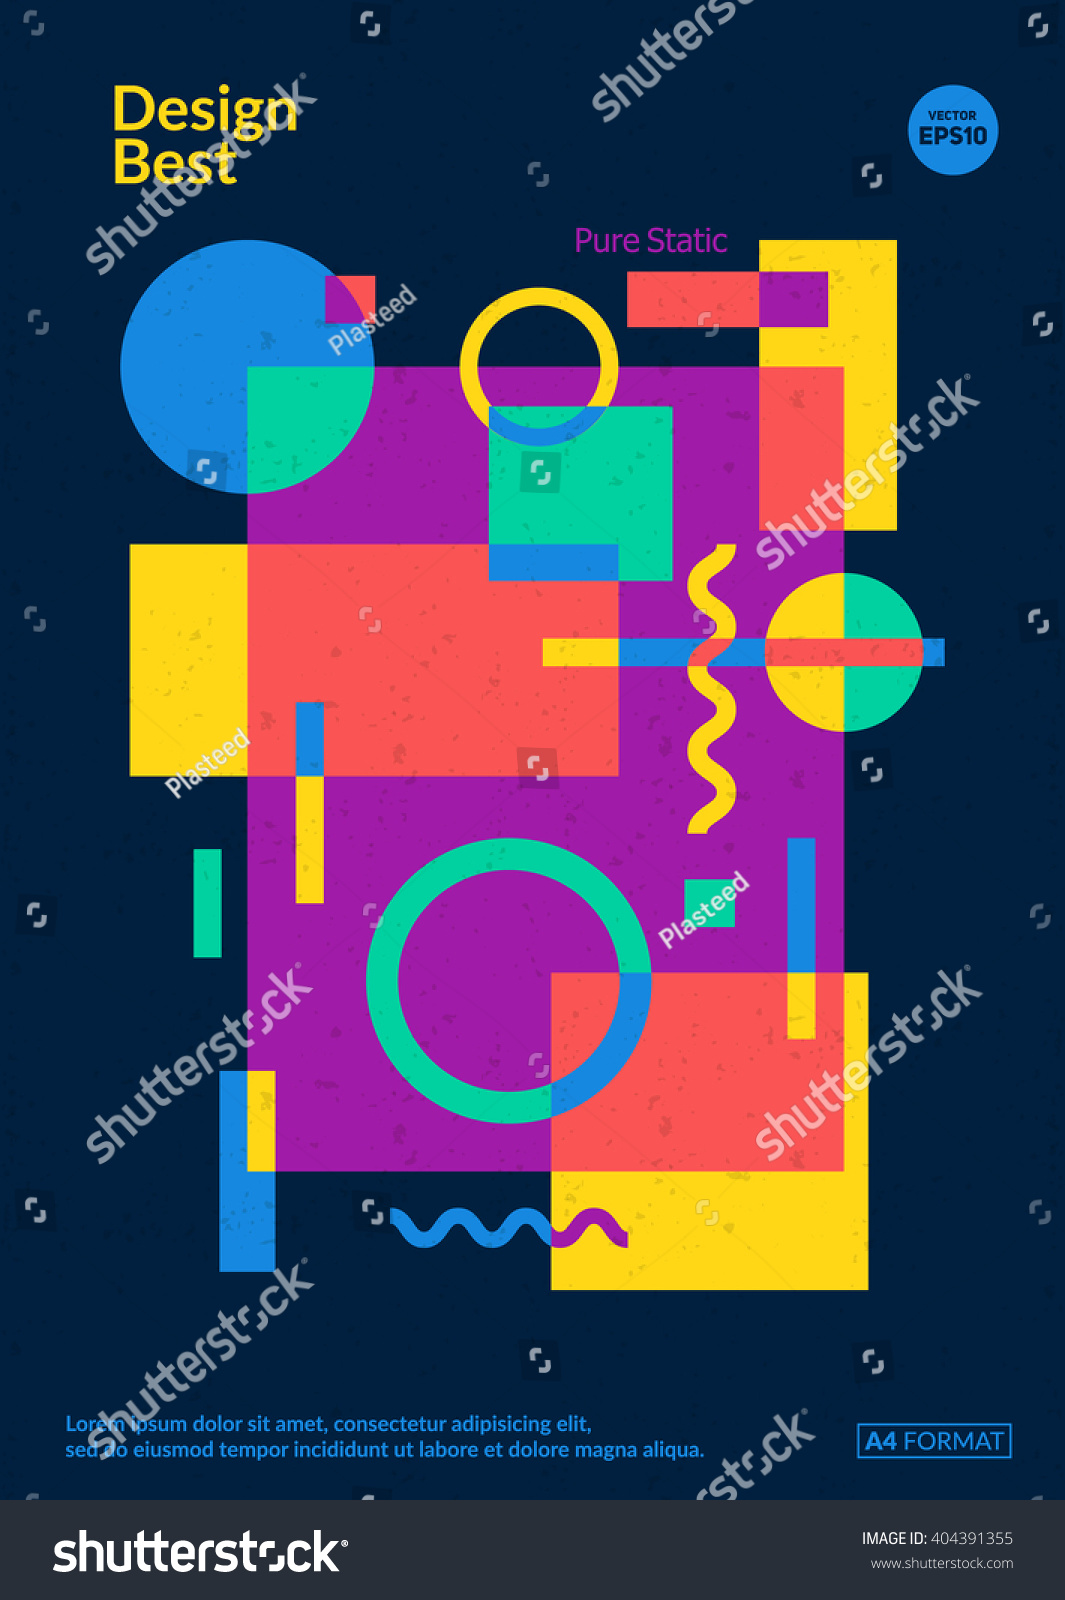 Static Design Poster Simple Colorful Geometric Stock Vector Royalty Free